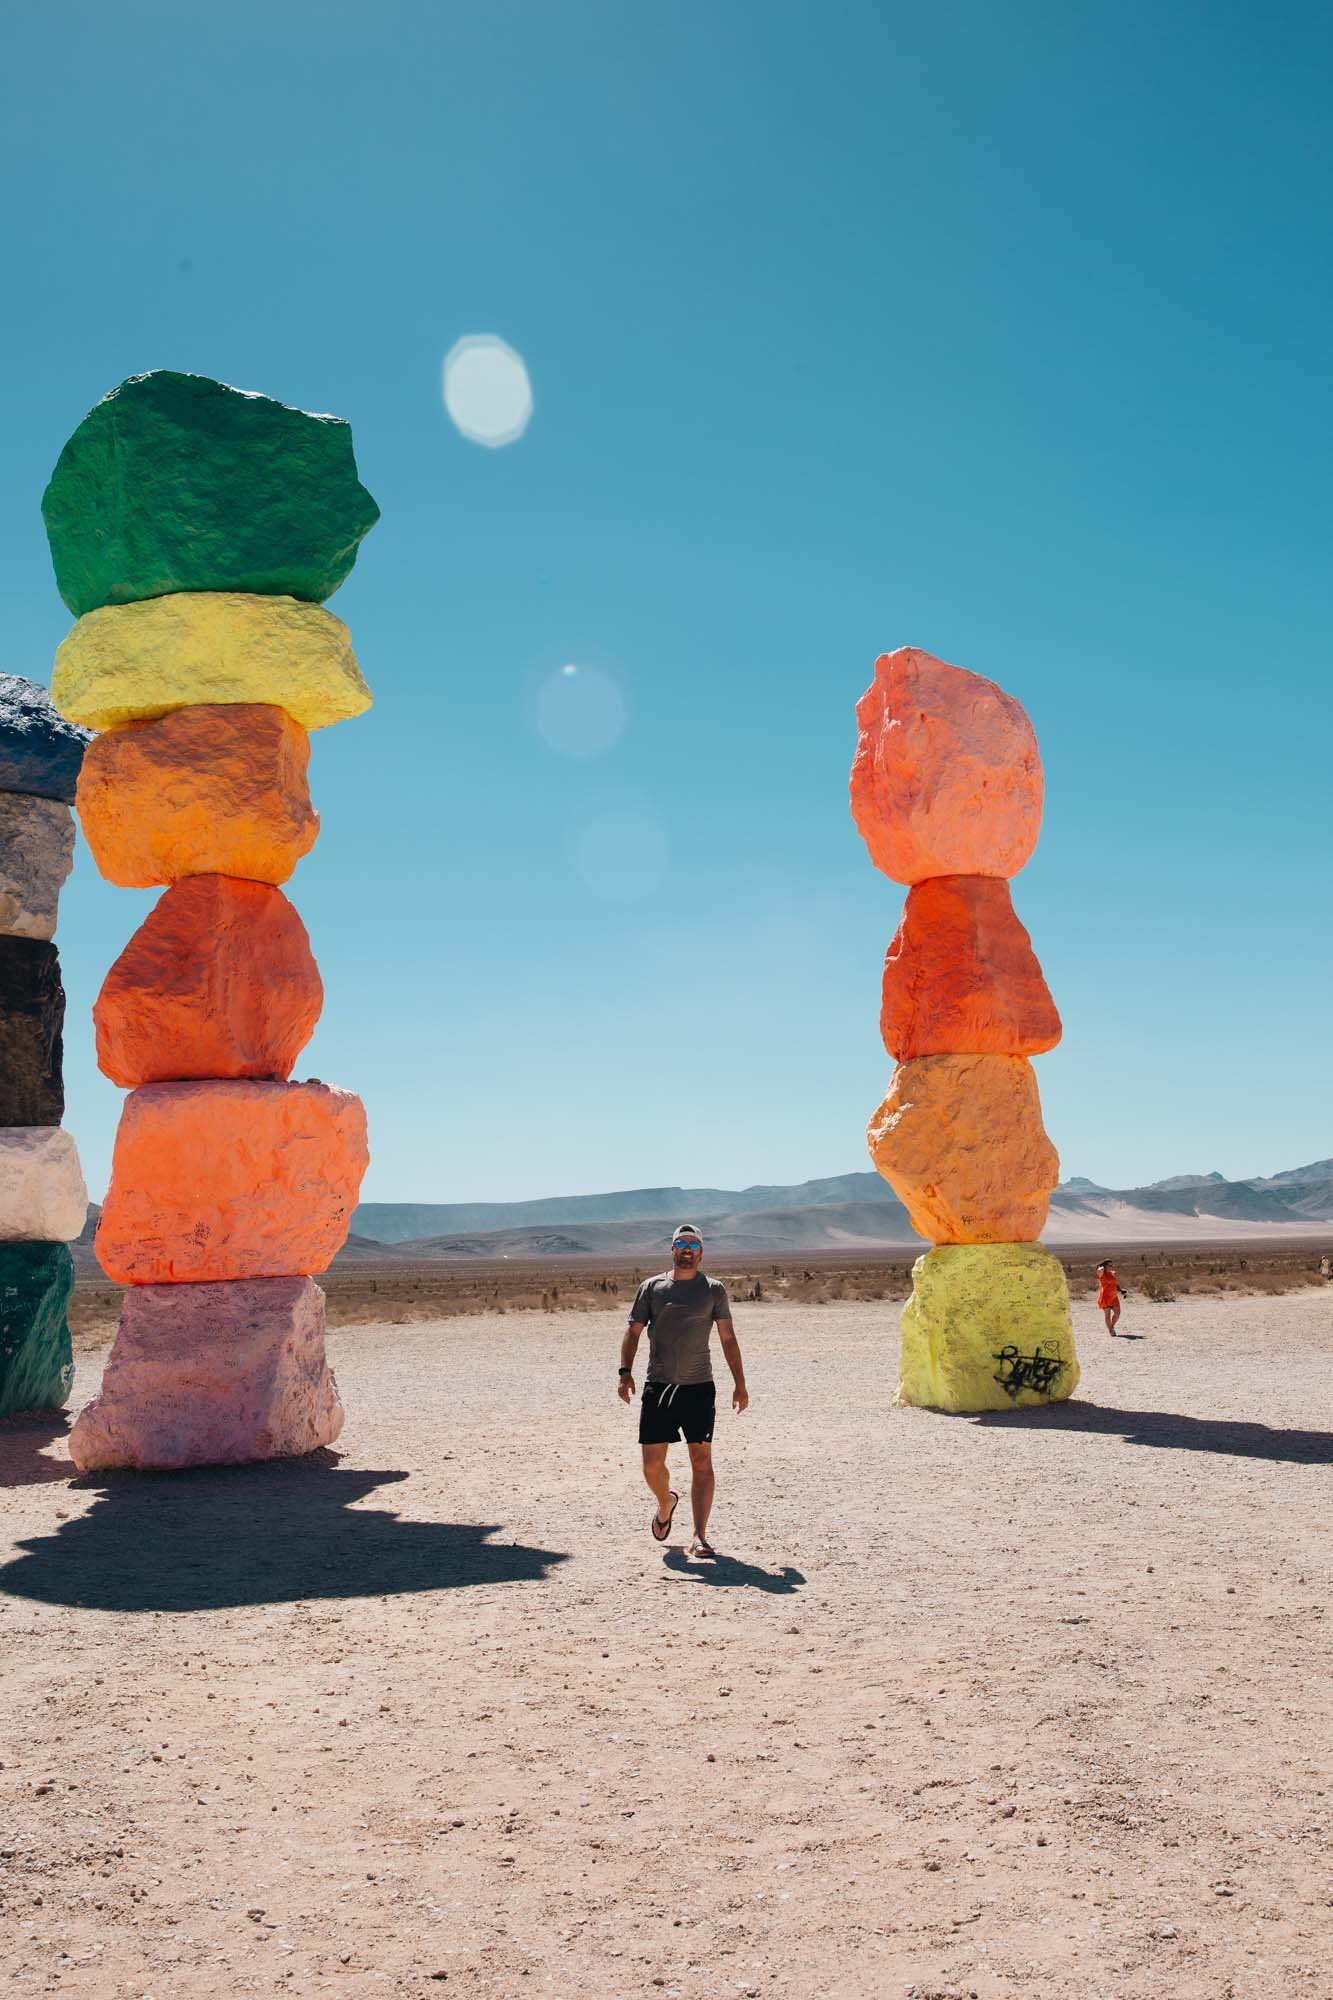 Seven Magic Mountains: A Colorful Oasis in the Desert